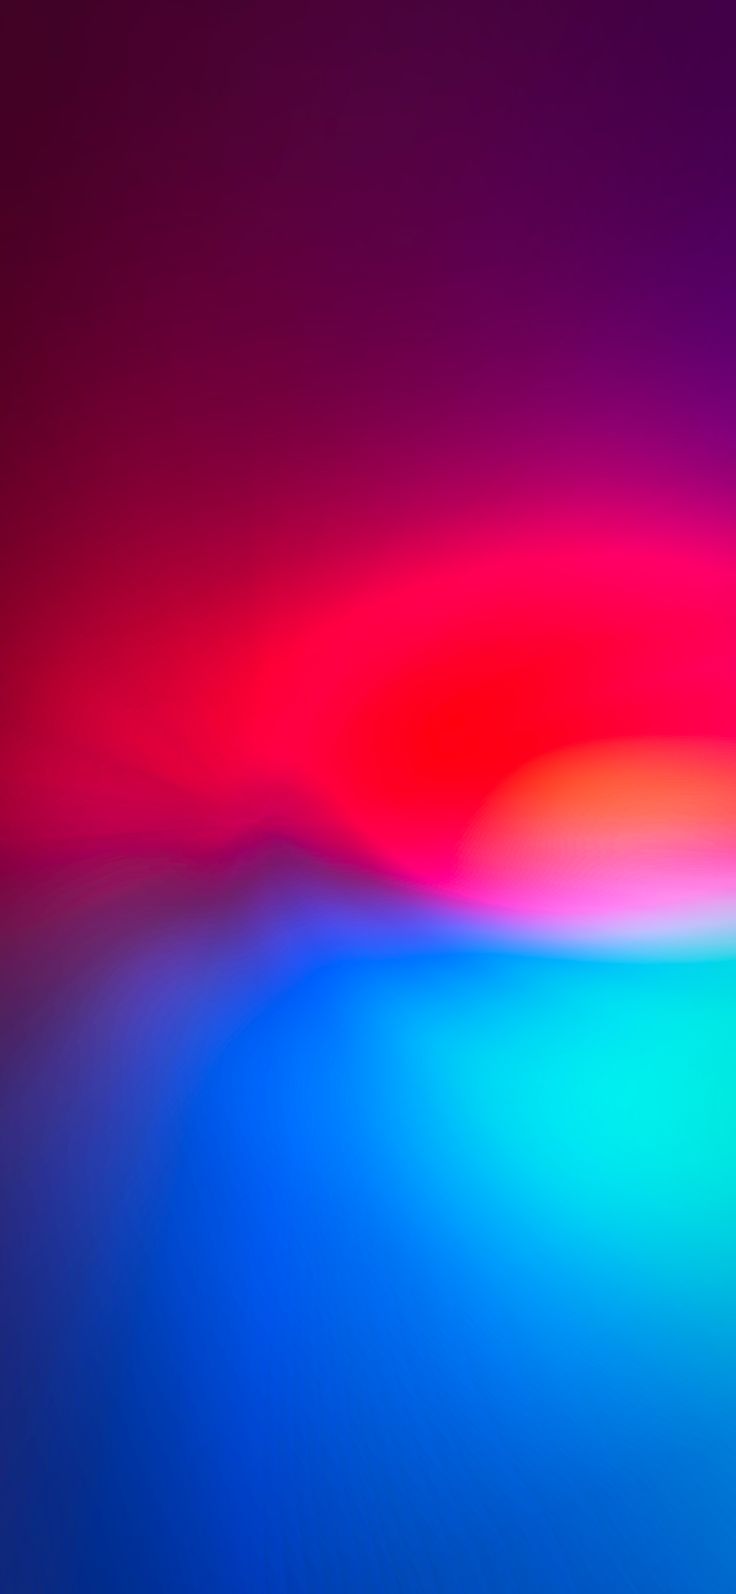 Red to blue gradient on Twitter. iPhone background wallpaper, Android wallpaper blue, Background HD wallpaper